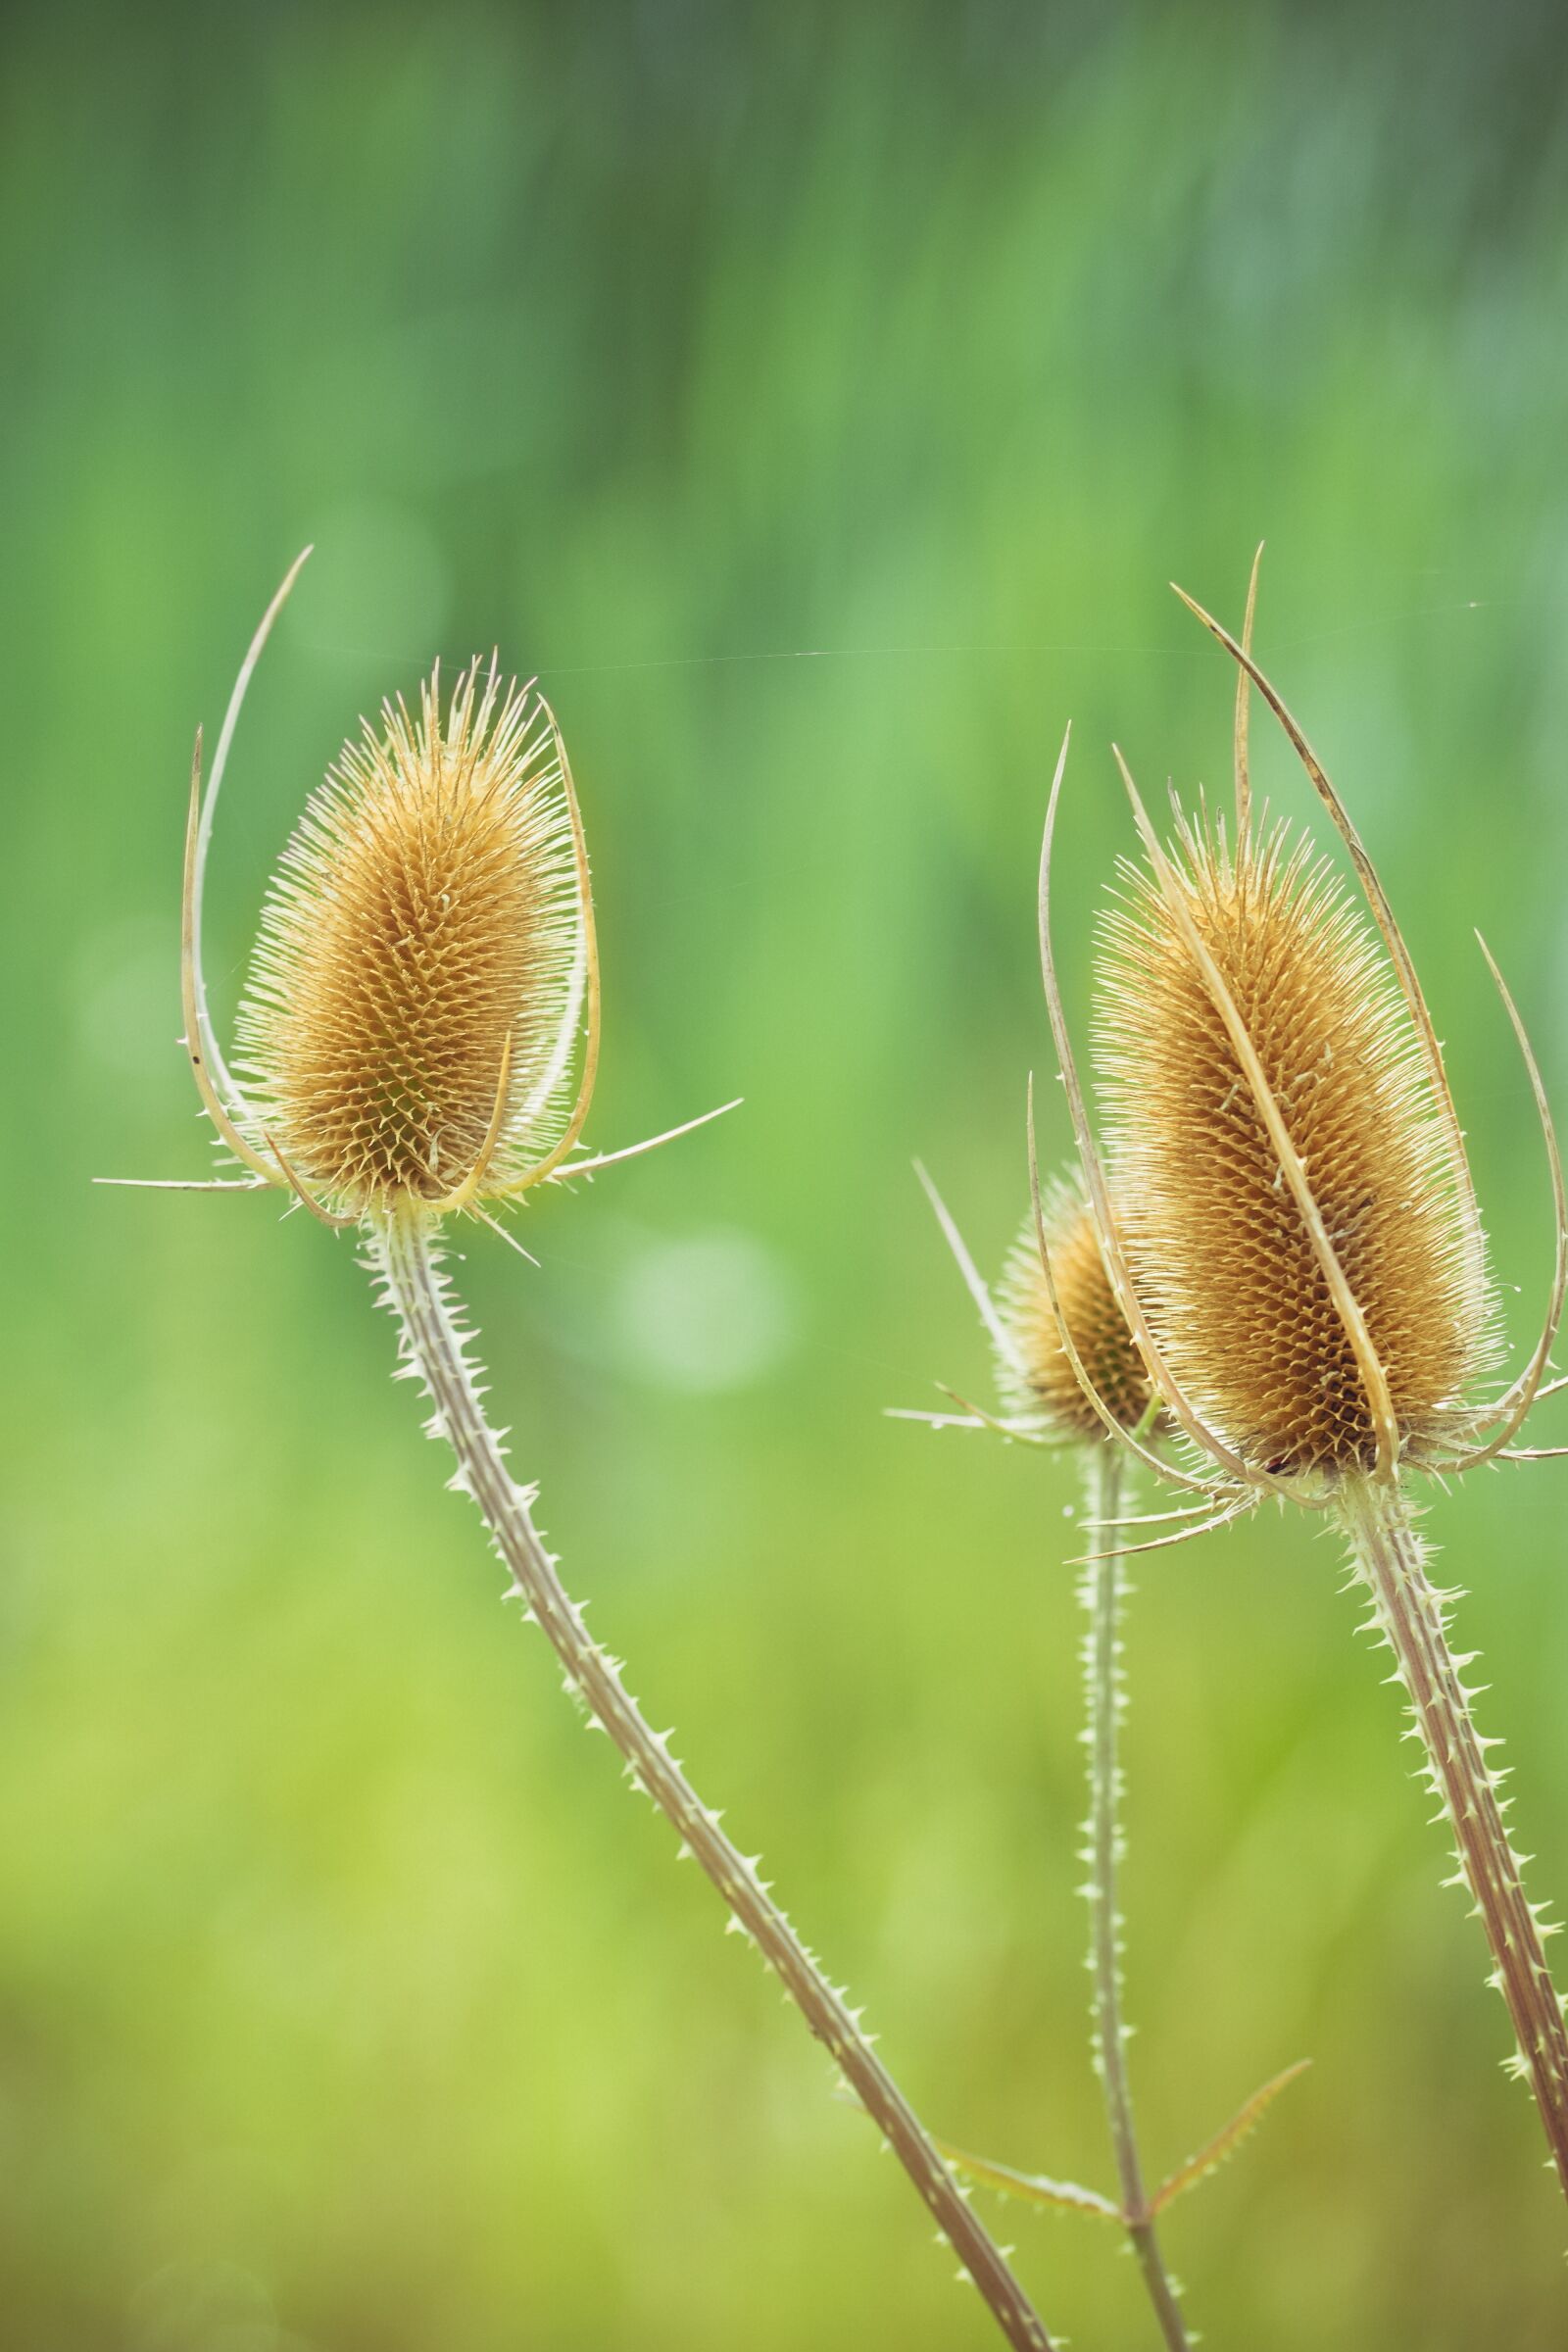 105mm F2.8 sample photo. Thistle, prickly, vegetable photography